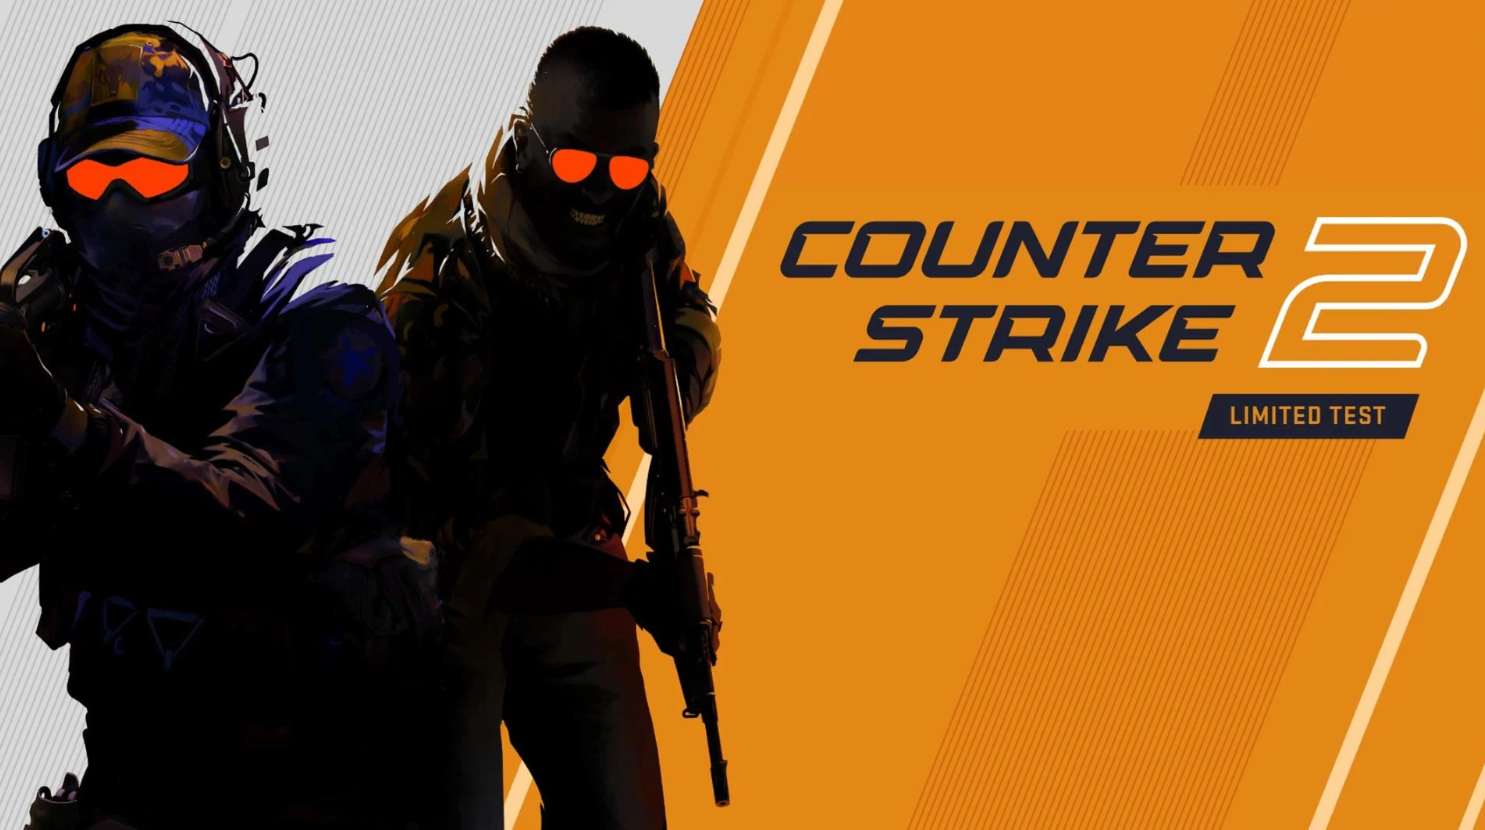 Valve Announces Counter-Strike 2, Set to Release This Summer